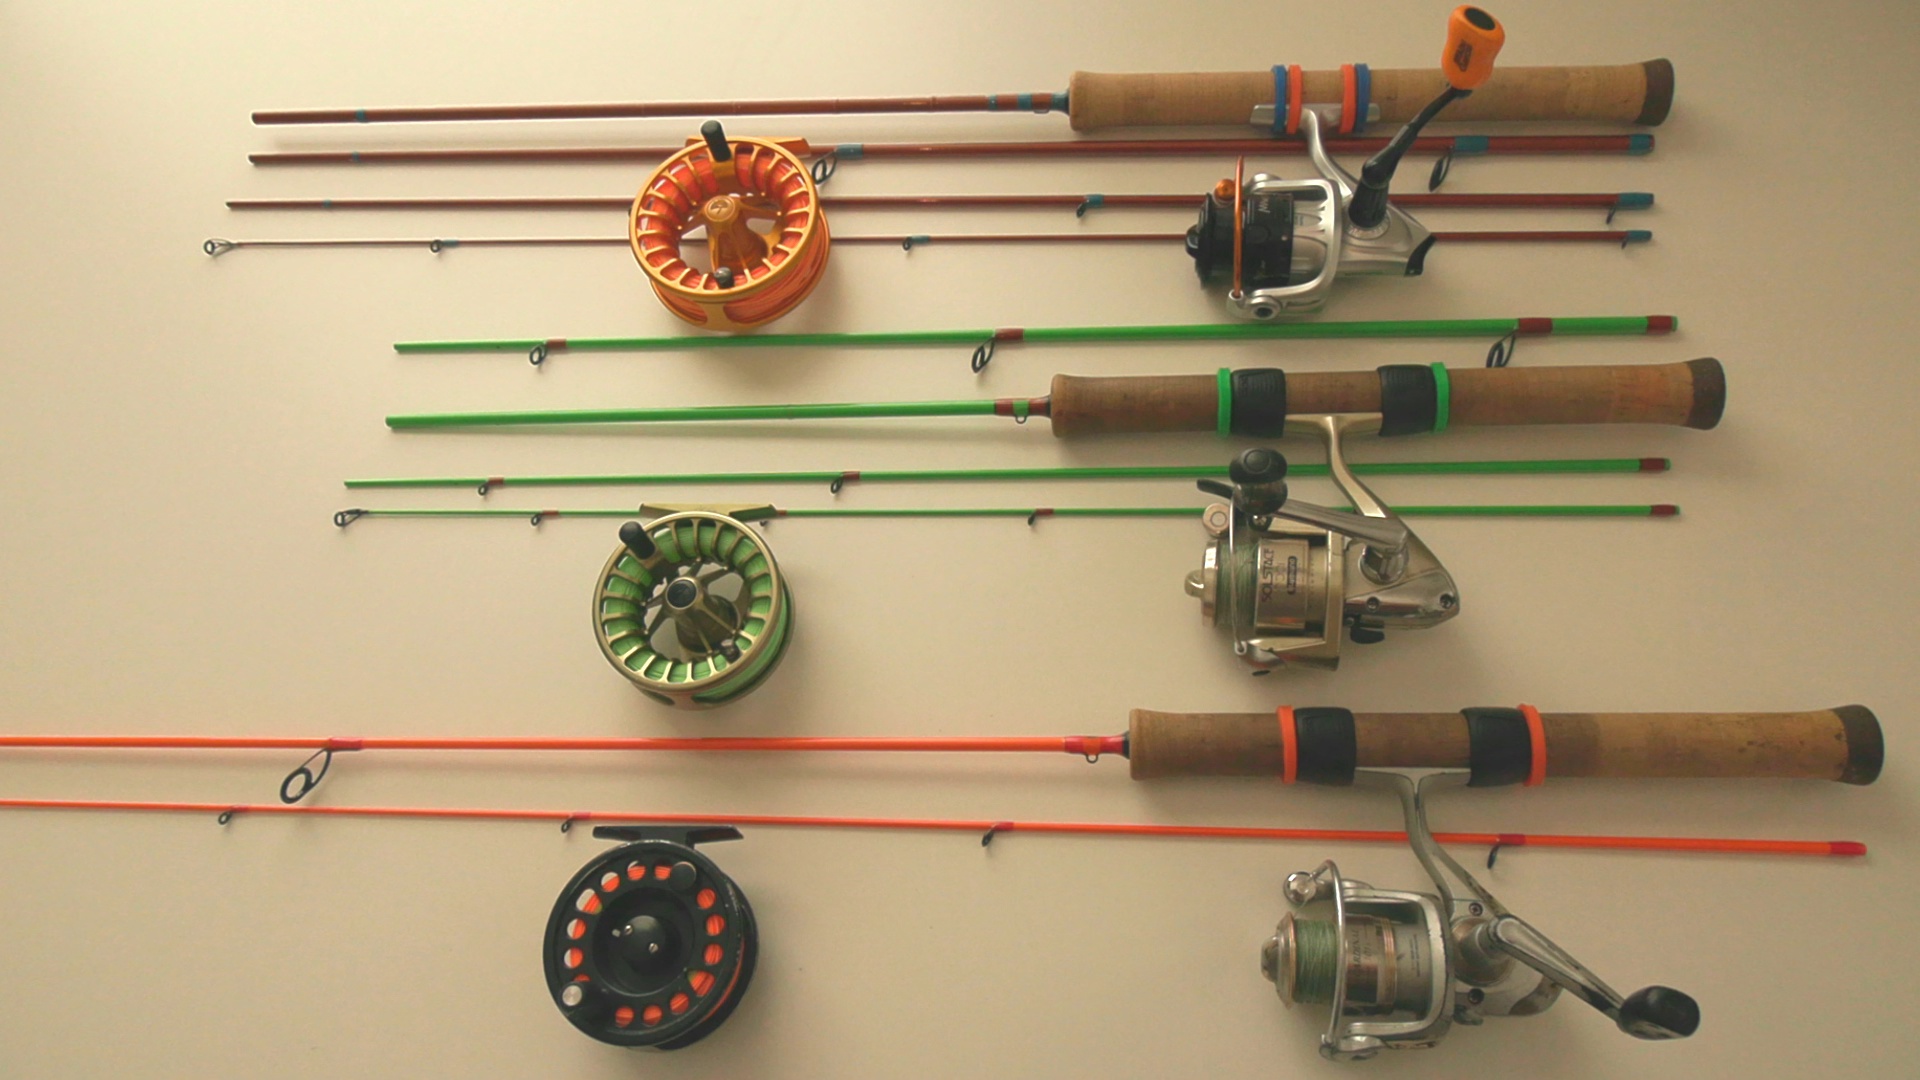 click for larger image  Fly fishing, Rod rack, Fishing rod storage